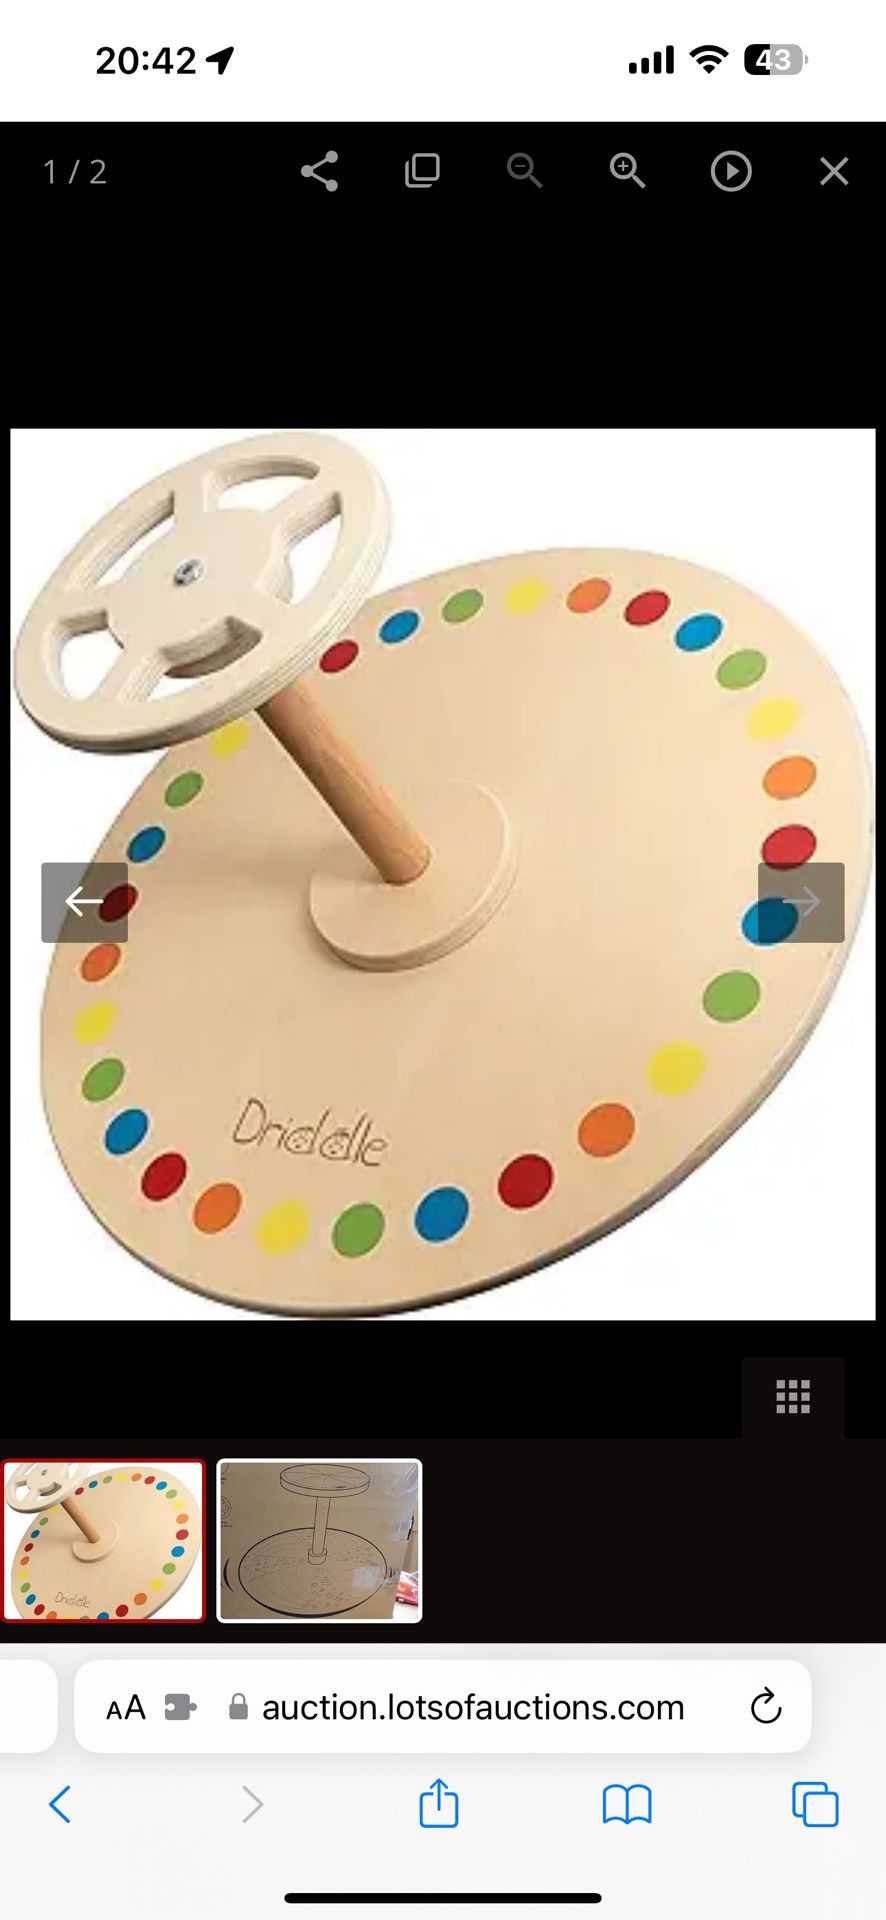 Wooden Spinner Seat - Bigger Size - Classic Spinning Activity Toy for Toddlers & Kids All Ages (Patent Pending) MSRP $99 